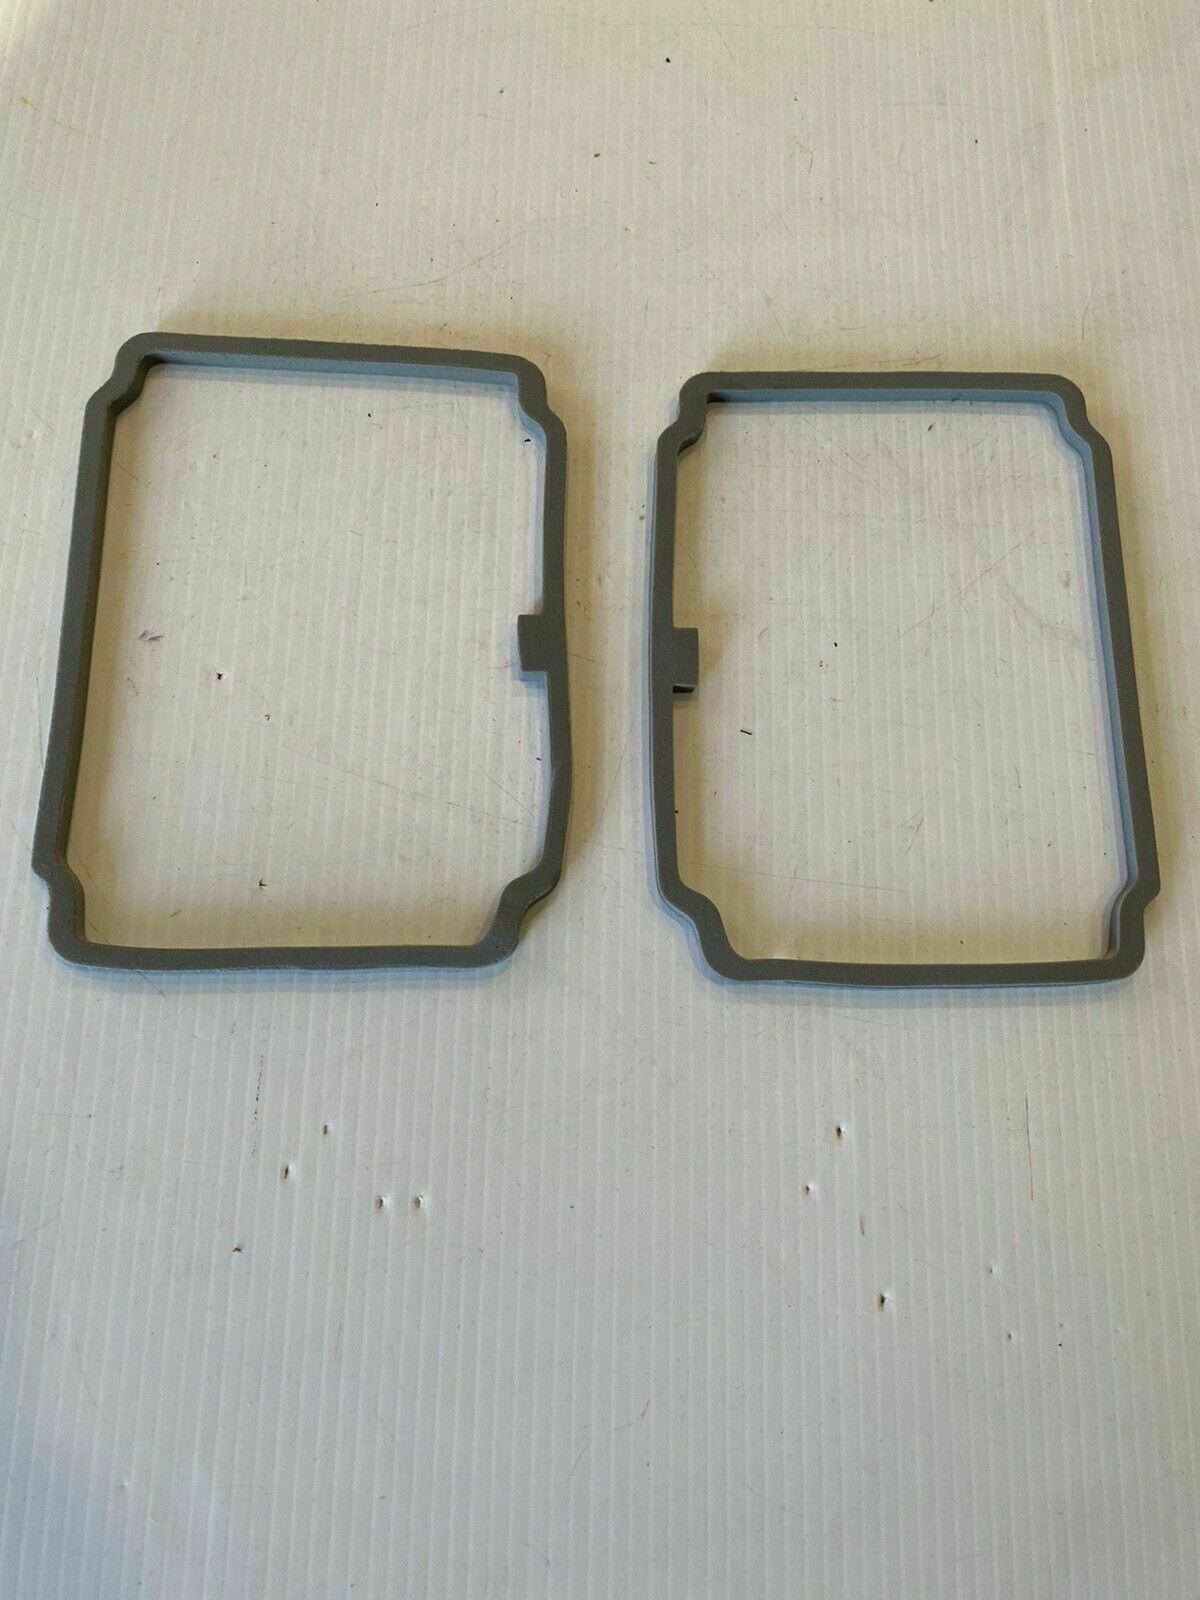 Gaskets: 1973-1987 Chevy Truck Tail Turn Light Lens Gaskets USA Pair